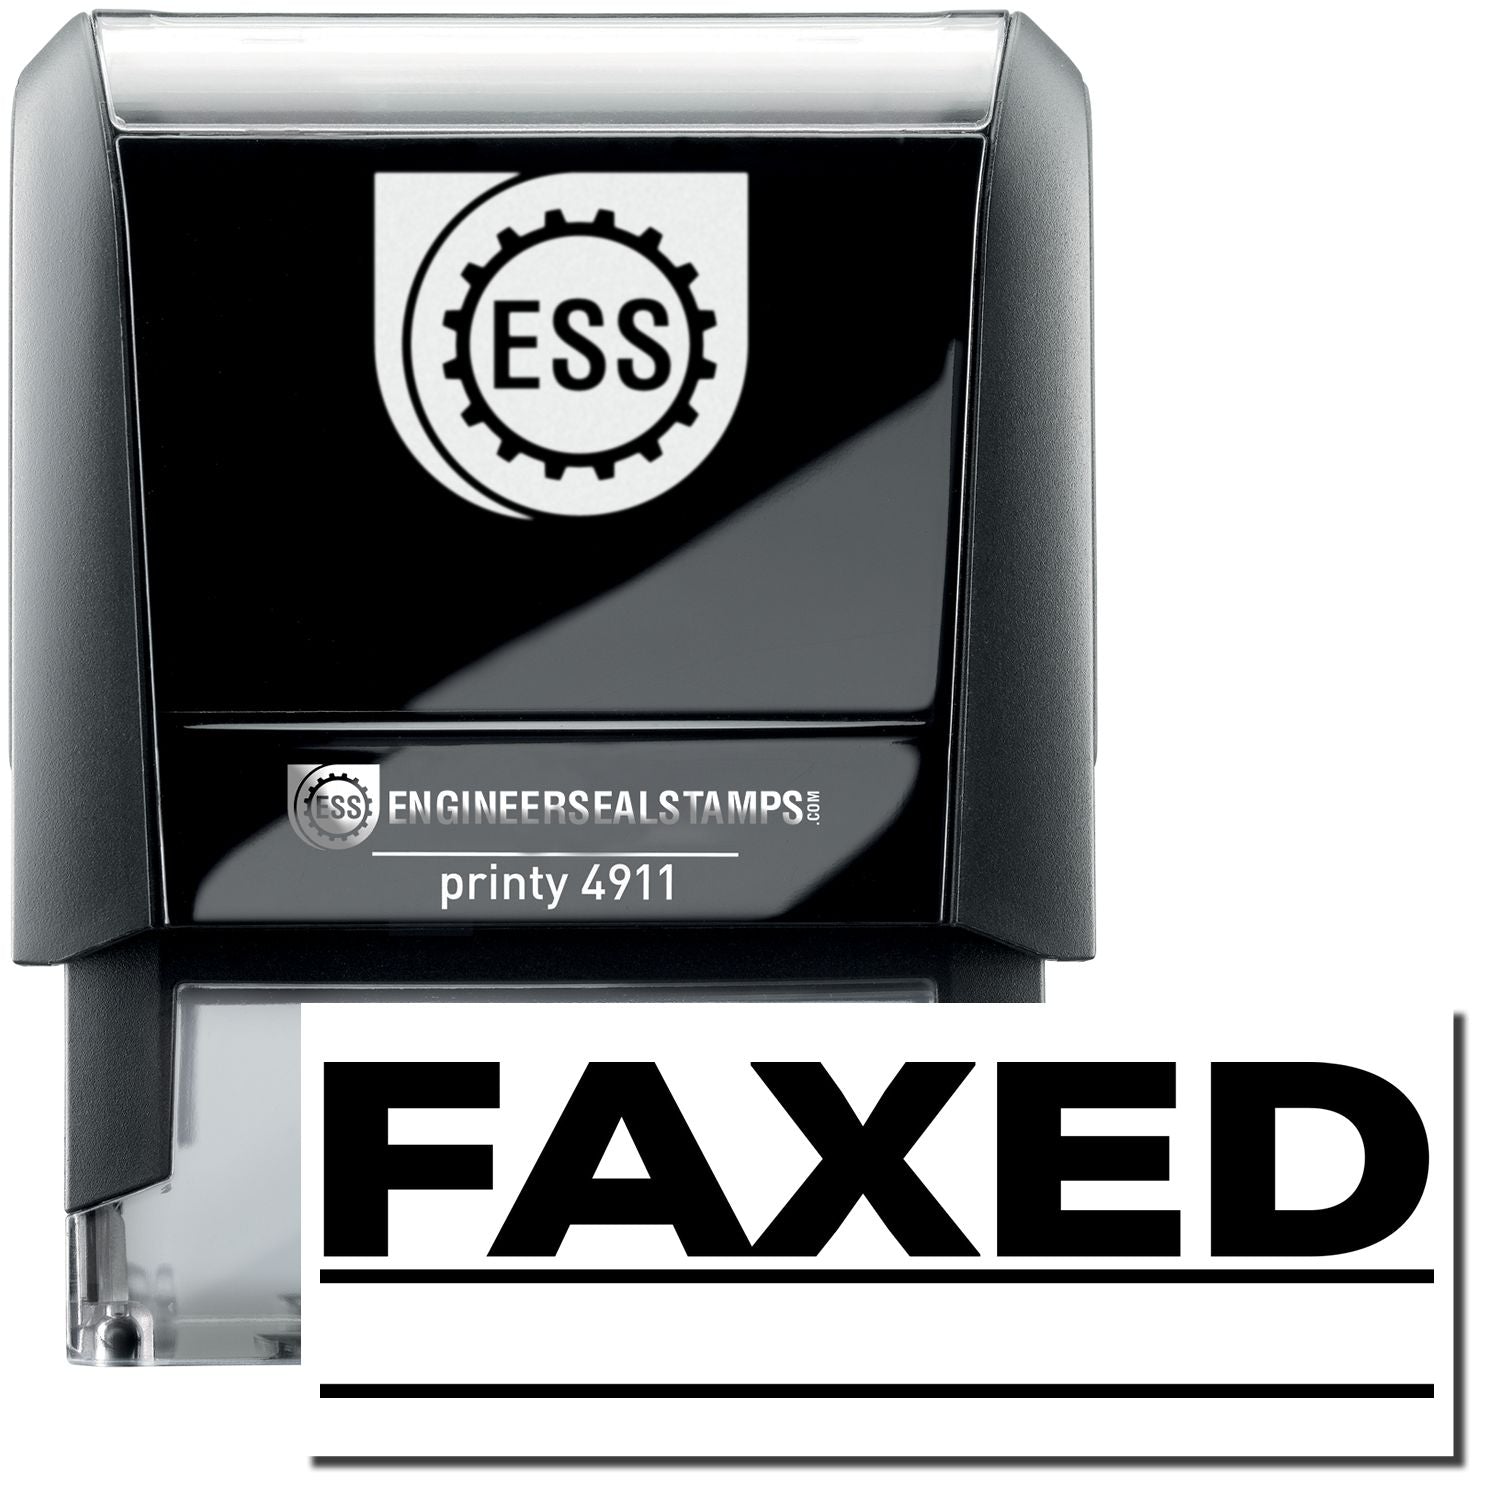 A self-inking stamp with a stamped image showing how the text "FAXED" with two lines below the text is displayed after stamping.